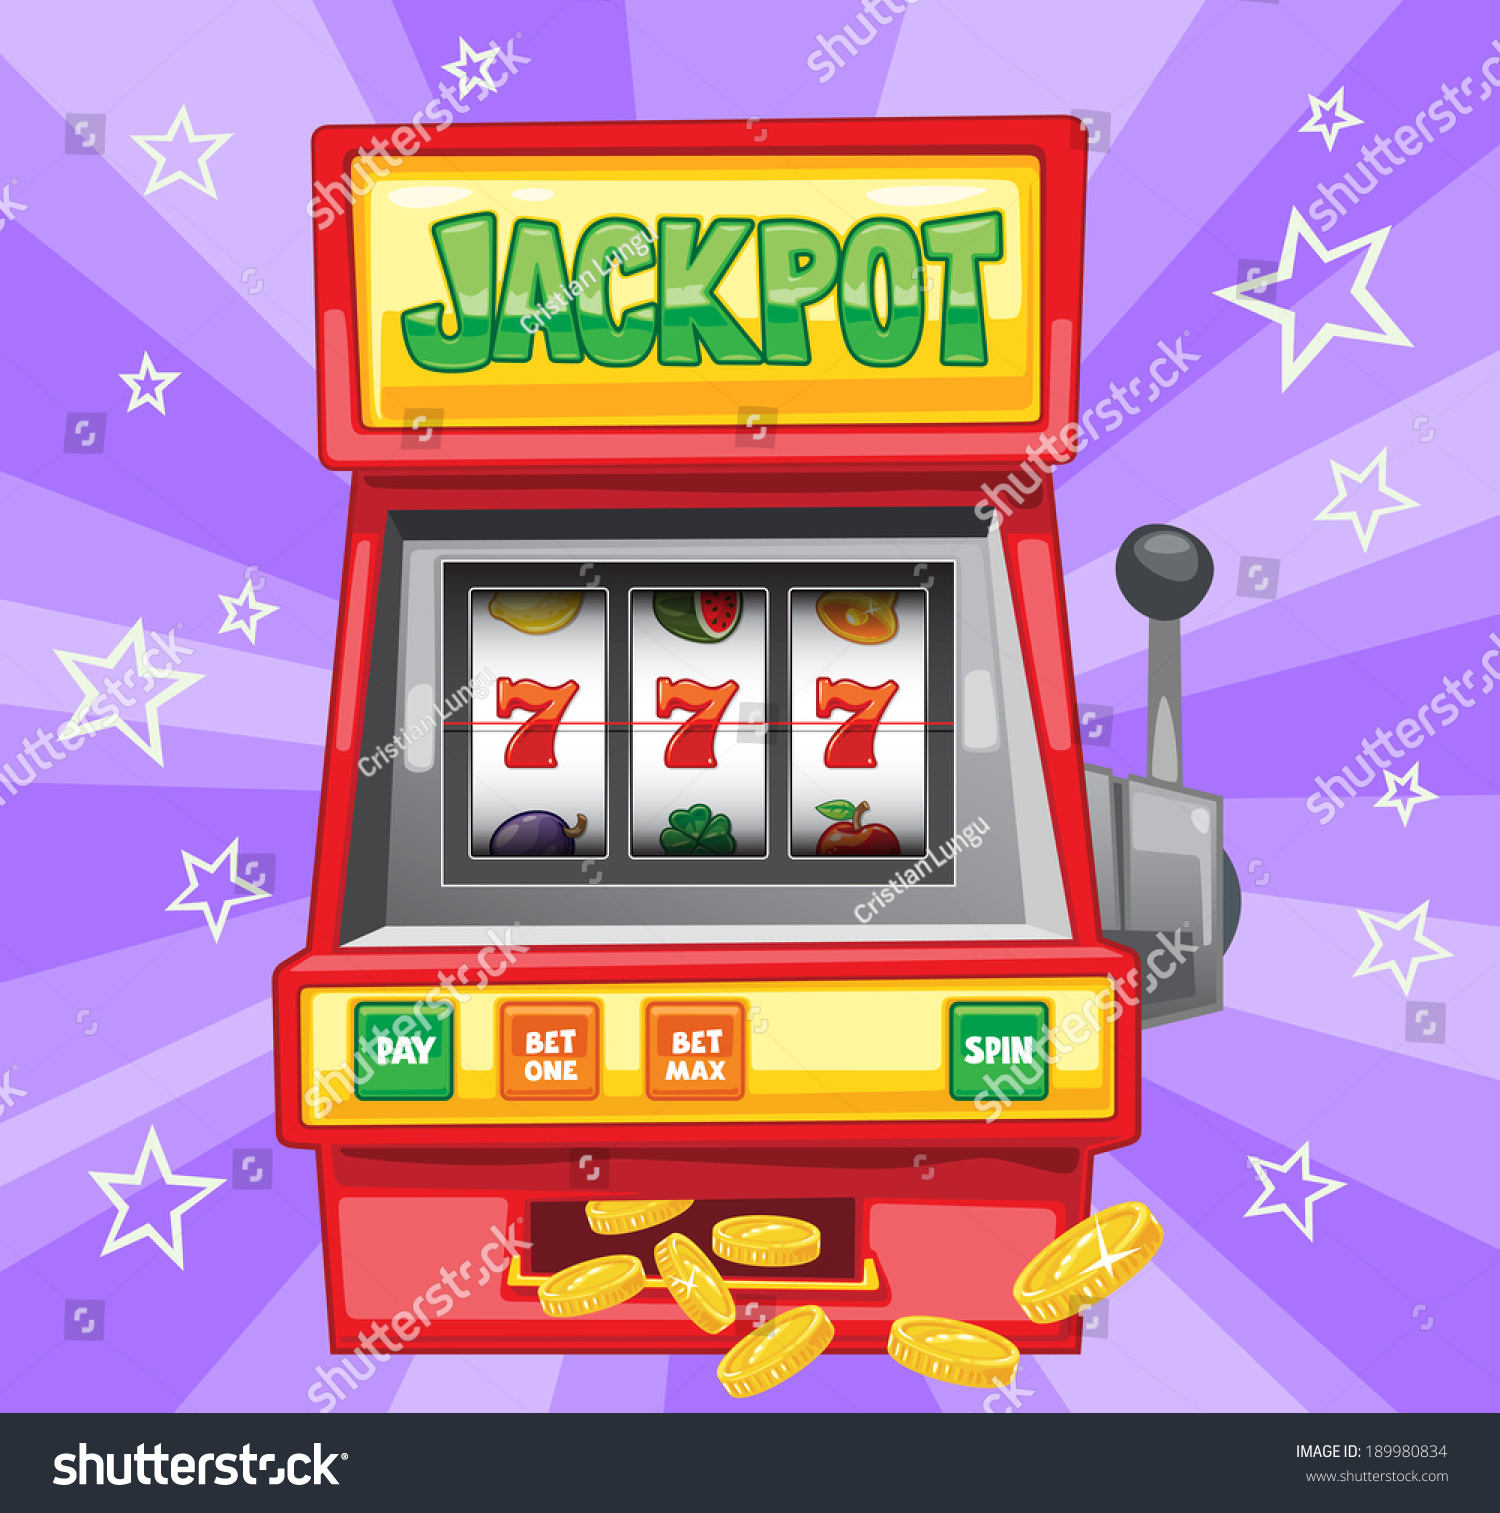 Jackpot Slot Machine Soft Collection Stock Vector (Royalty Free) 189980834